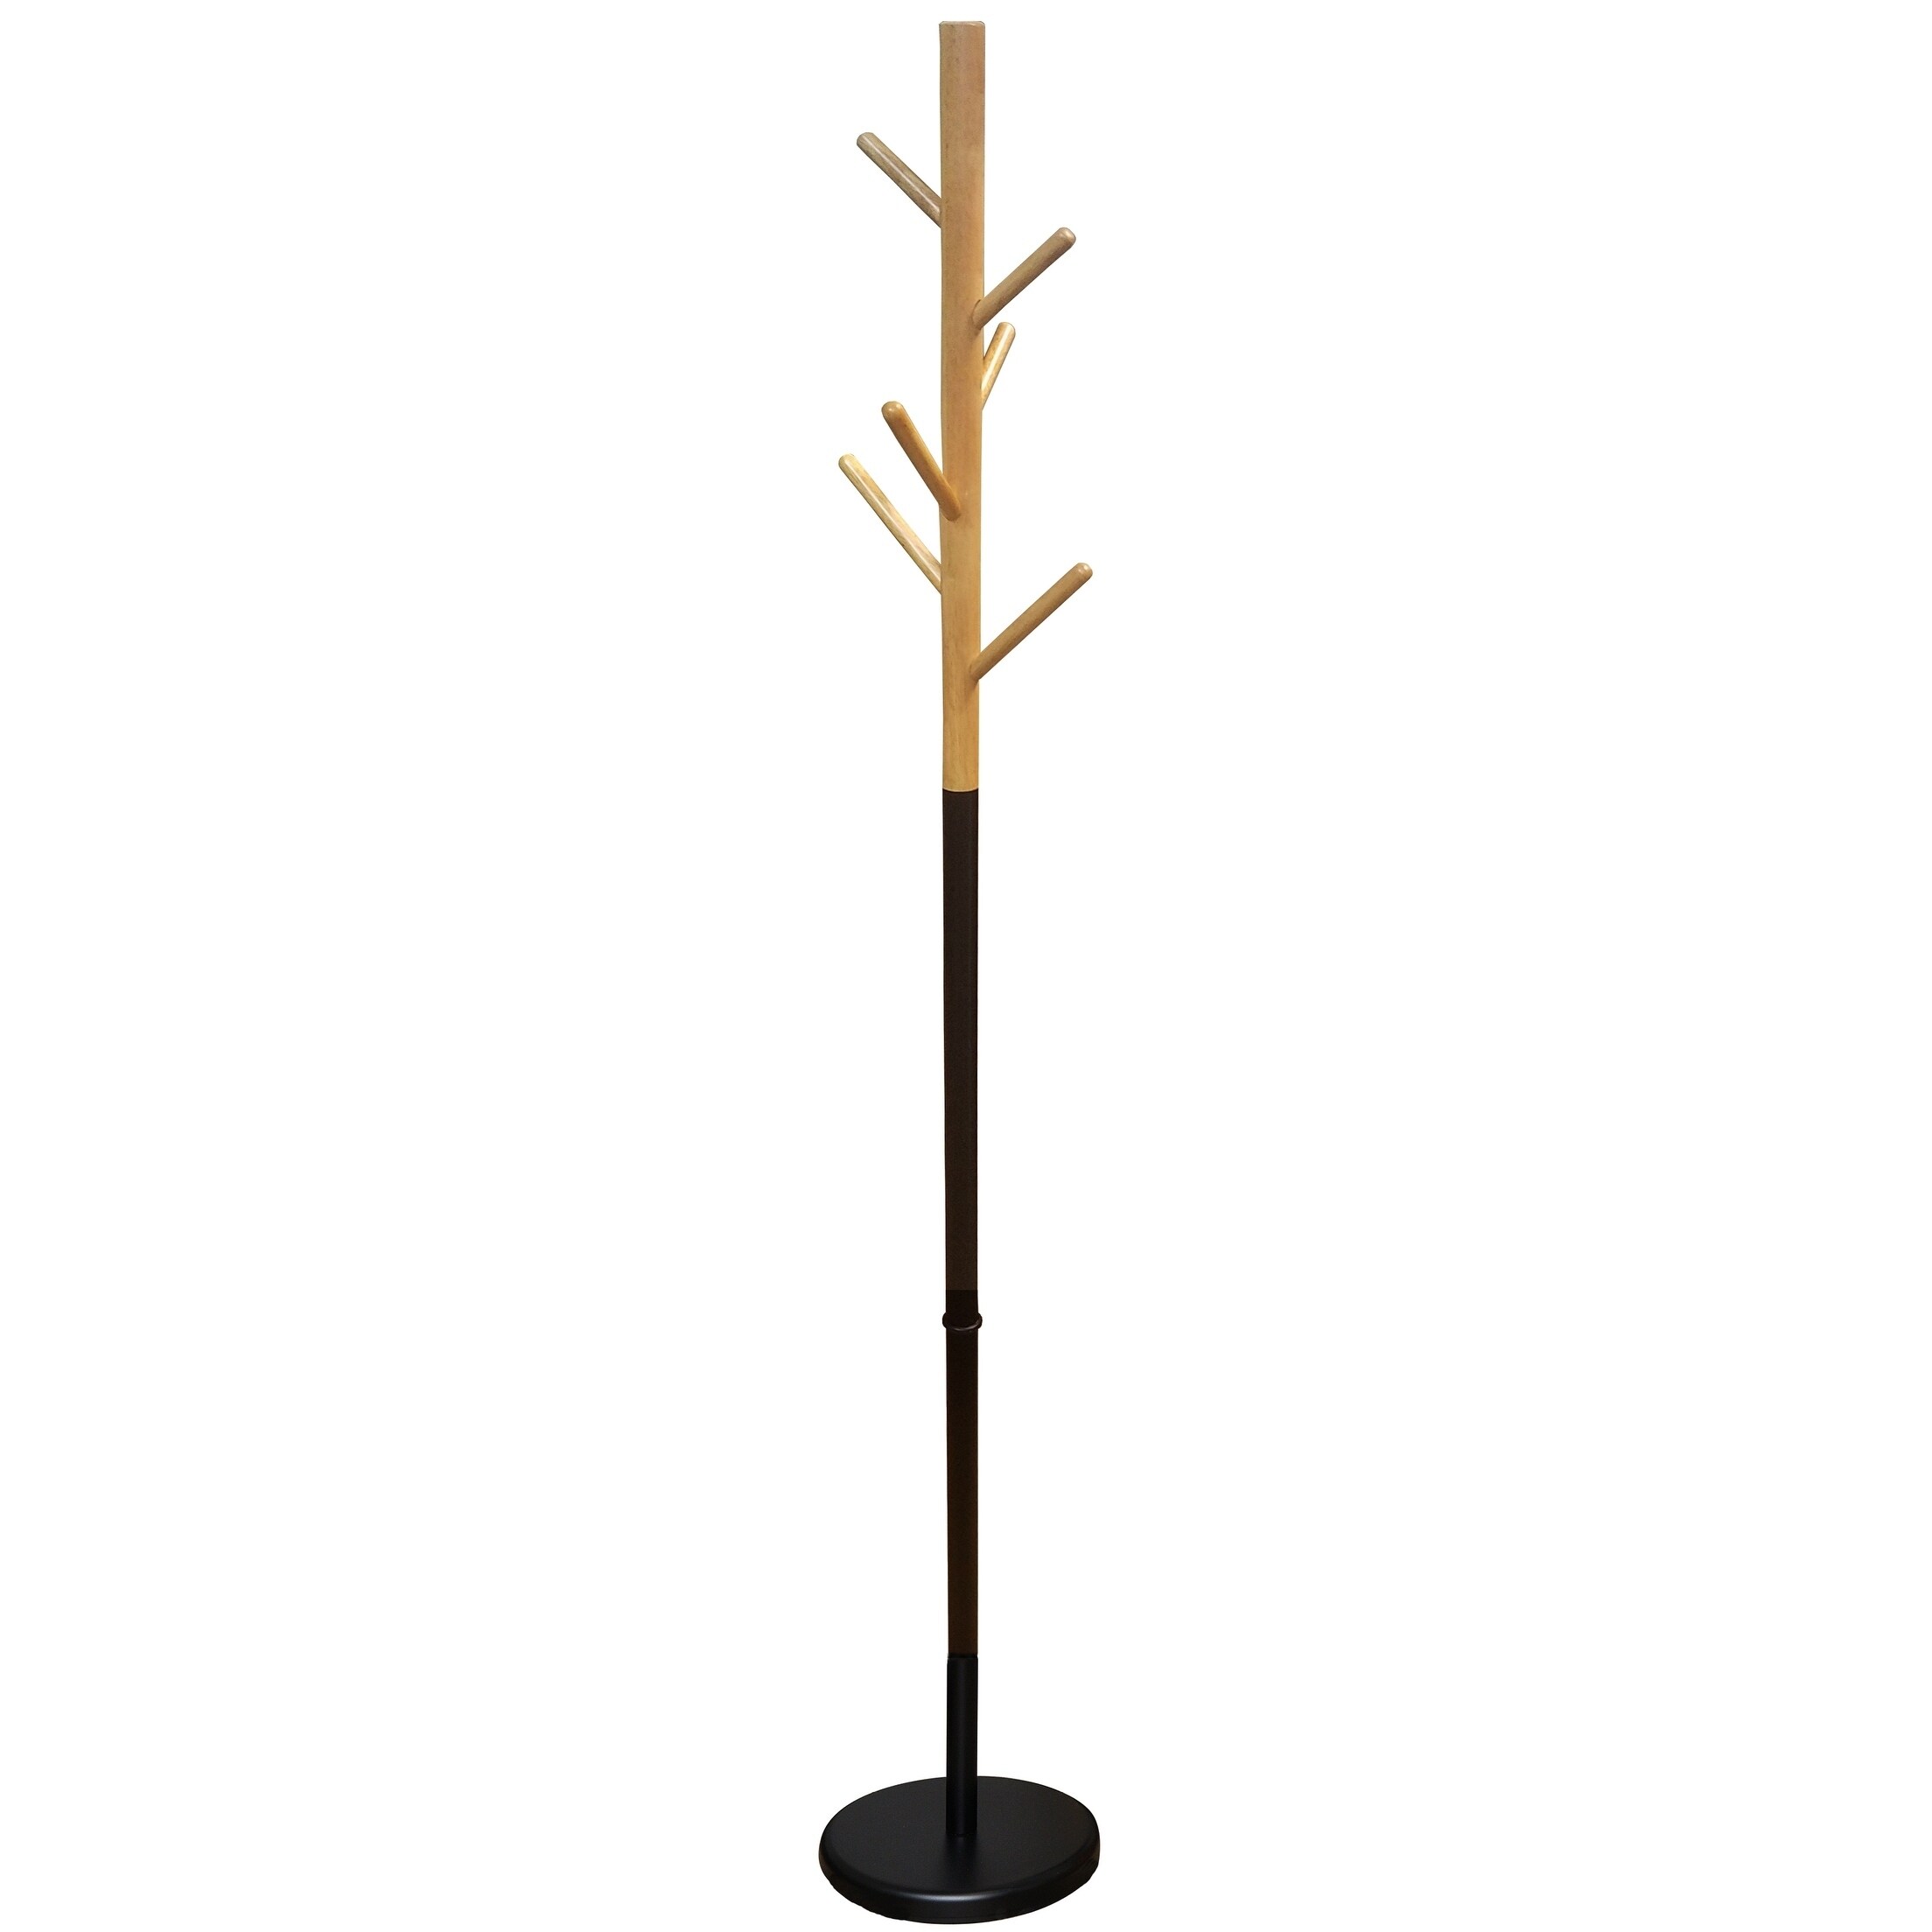 Tendance 96113237 Evideco Coat Rack Standing Hall Tree for Entryway 6 Hooks Black and Natural 69.2 H x 11.5